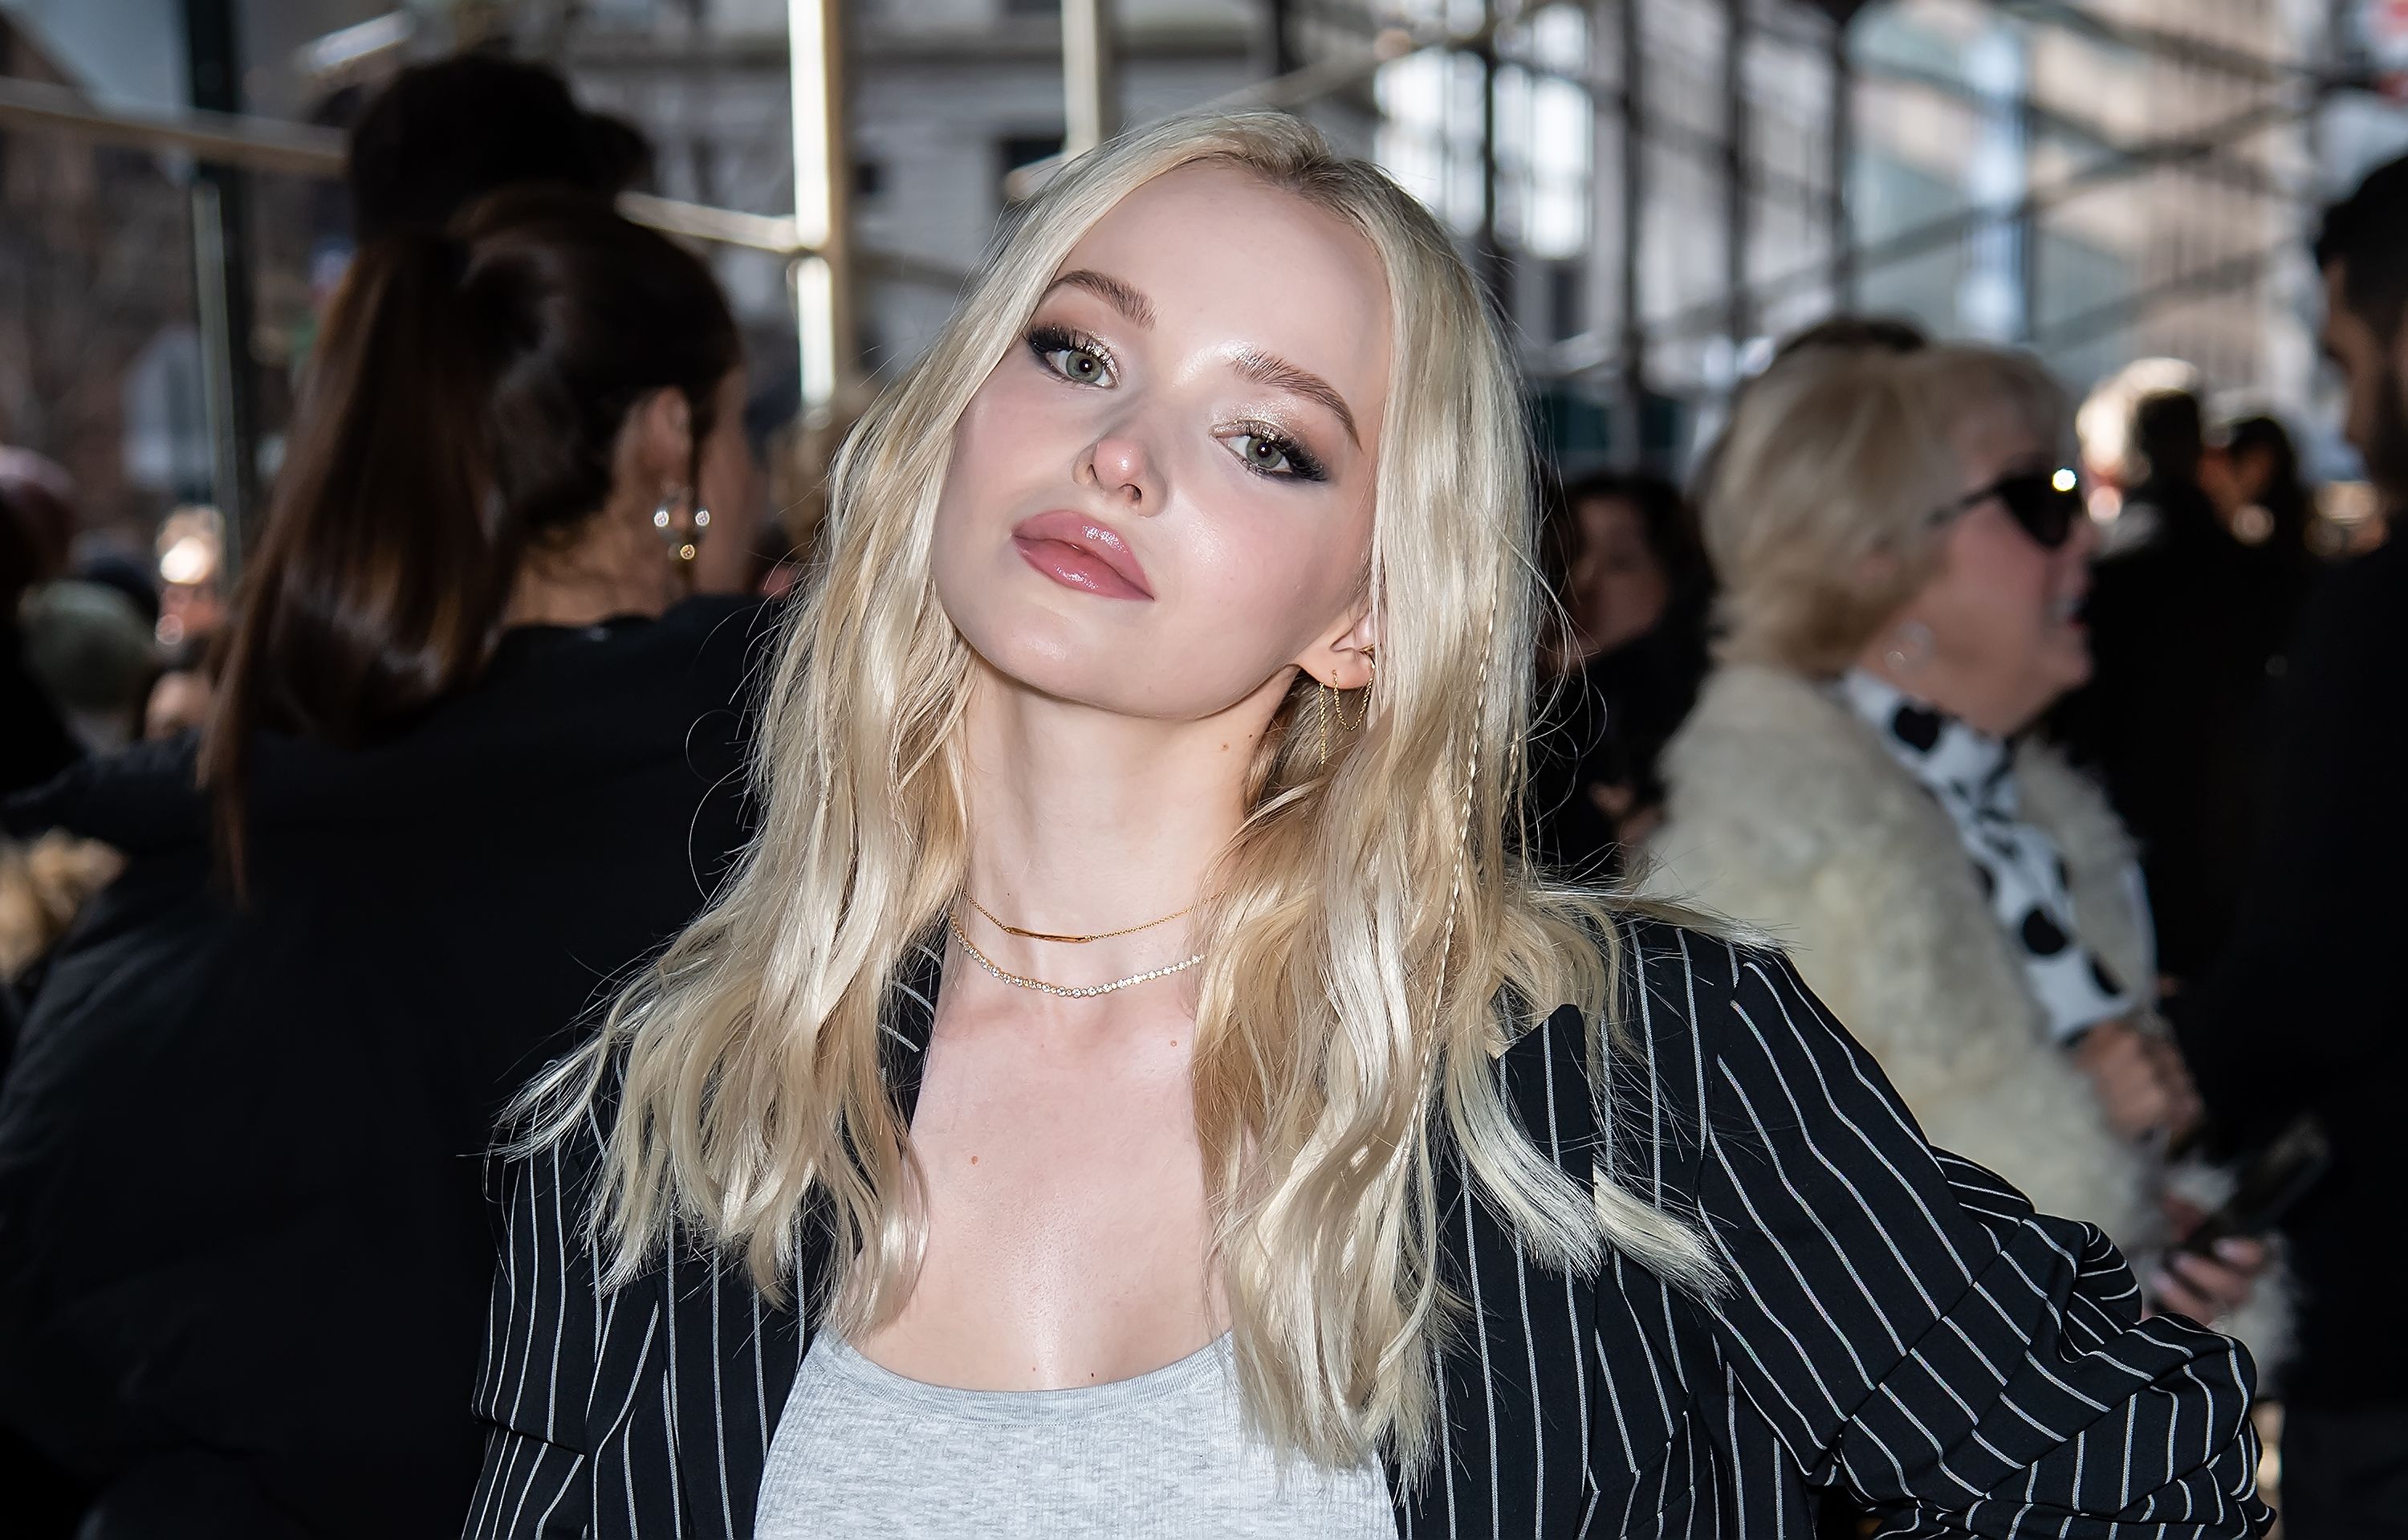 Dove cameron says liv and maddie are part of the lgbtq munity